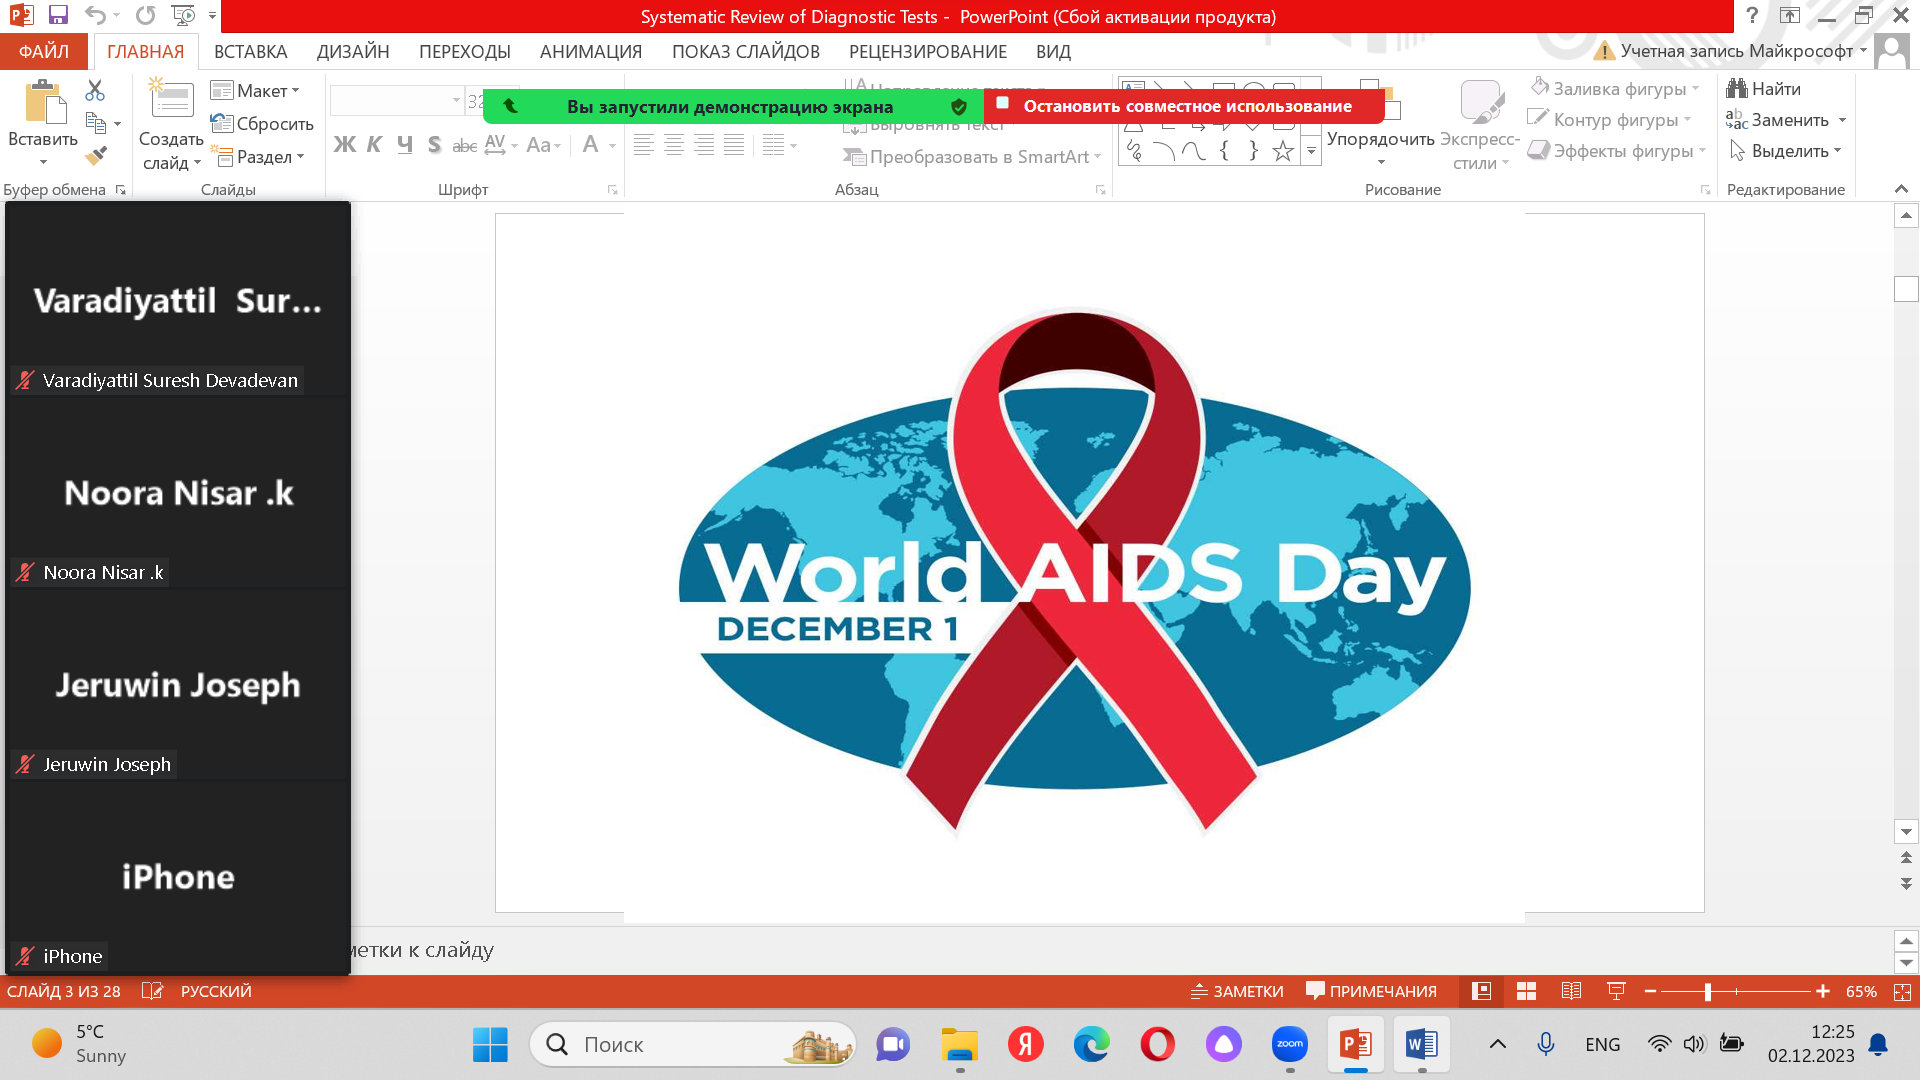 Prevention of HIV/AIDS